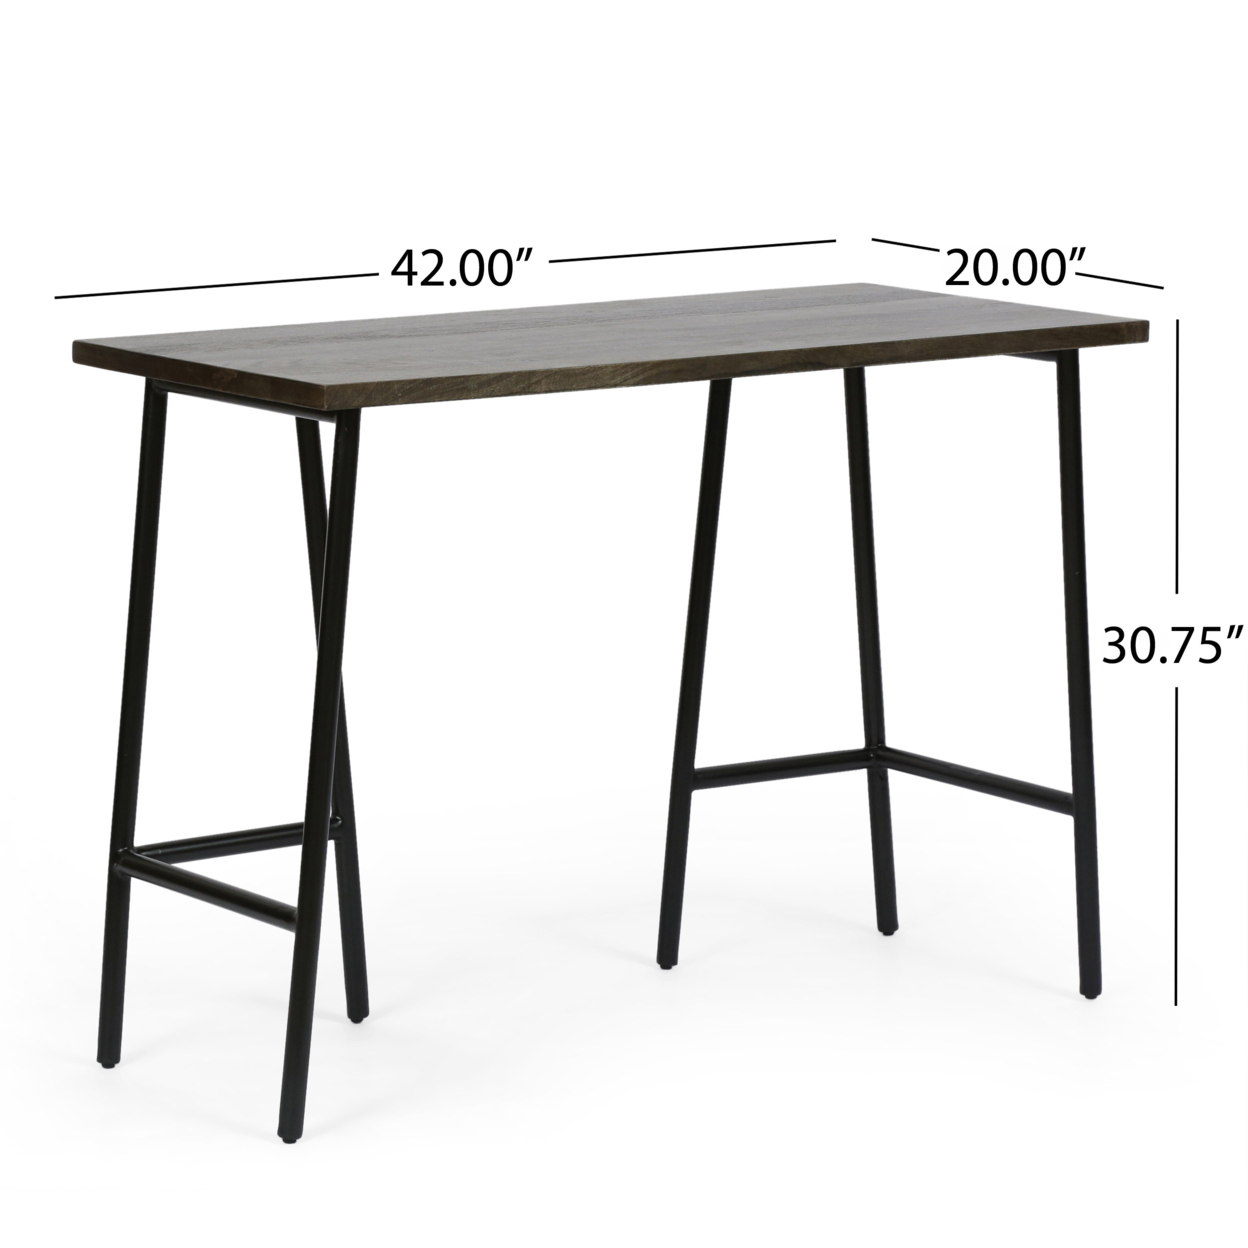 Clermont Modern Industrial Handcrafted Mango Wood Desk, Brown And Black